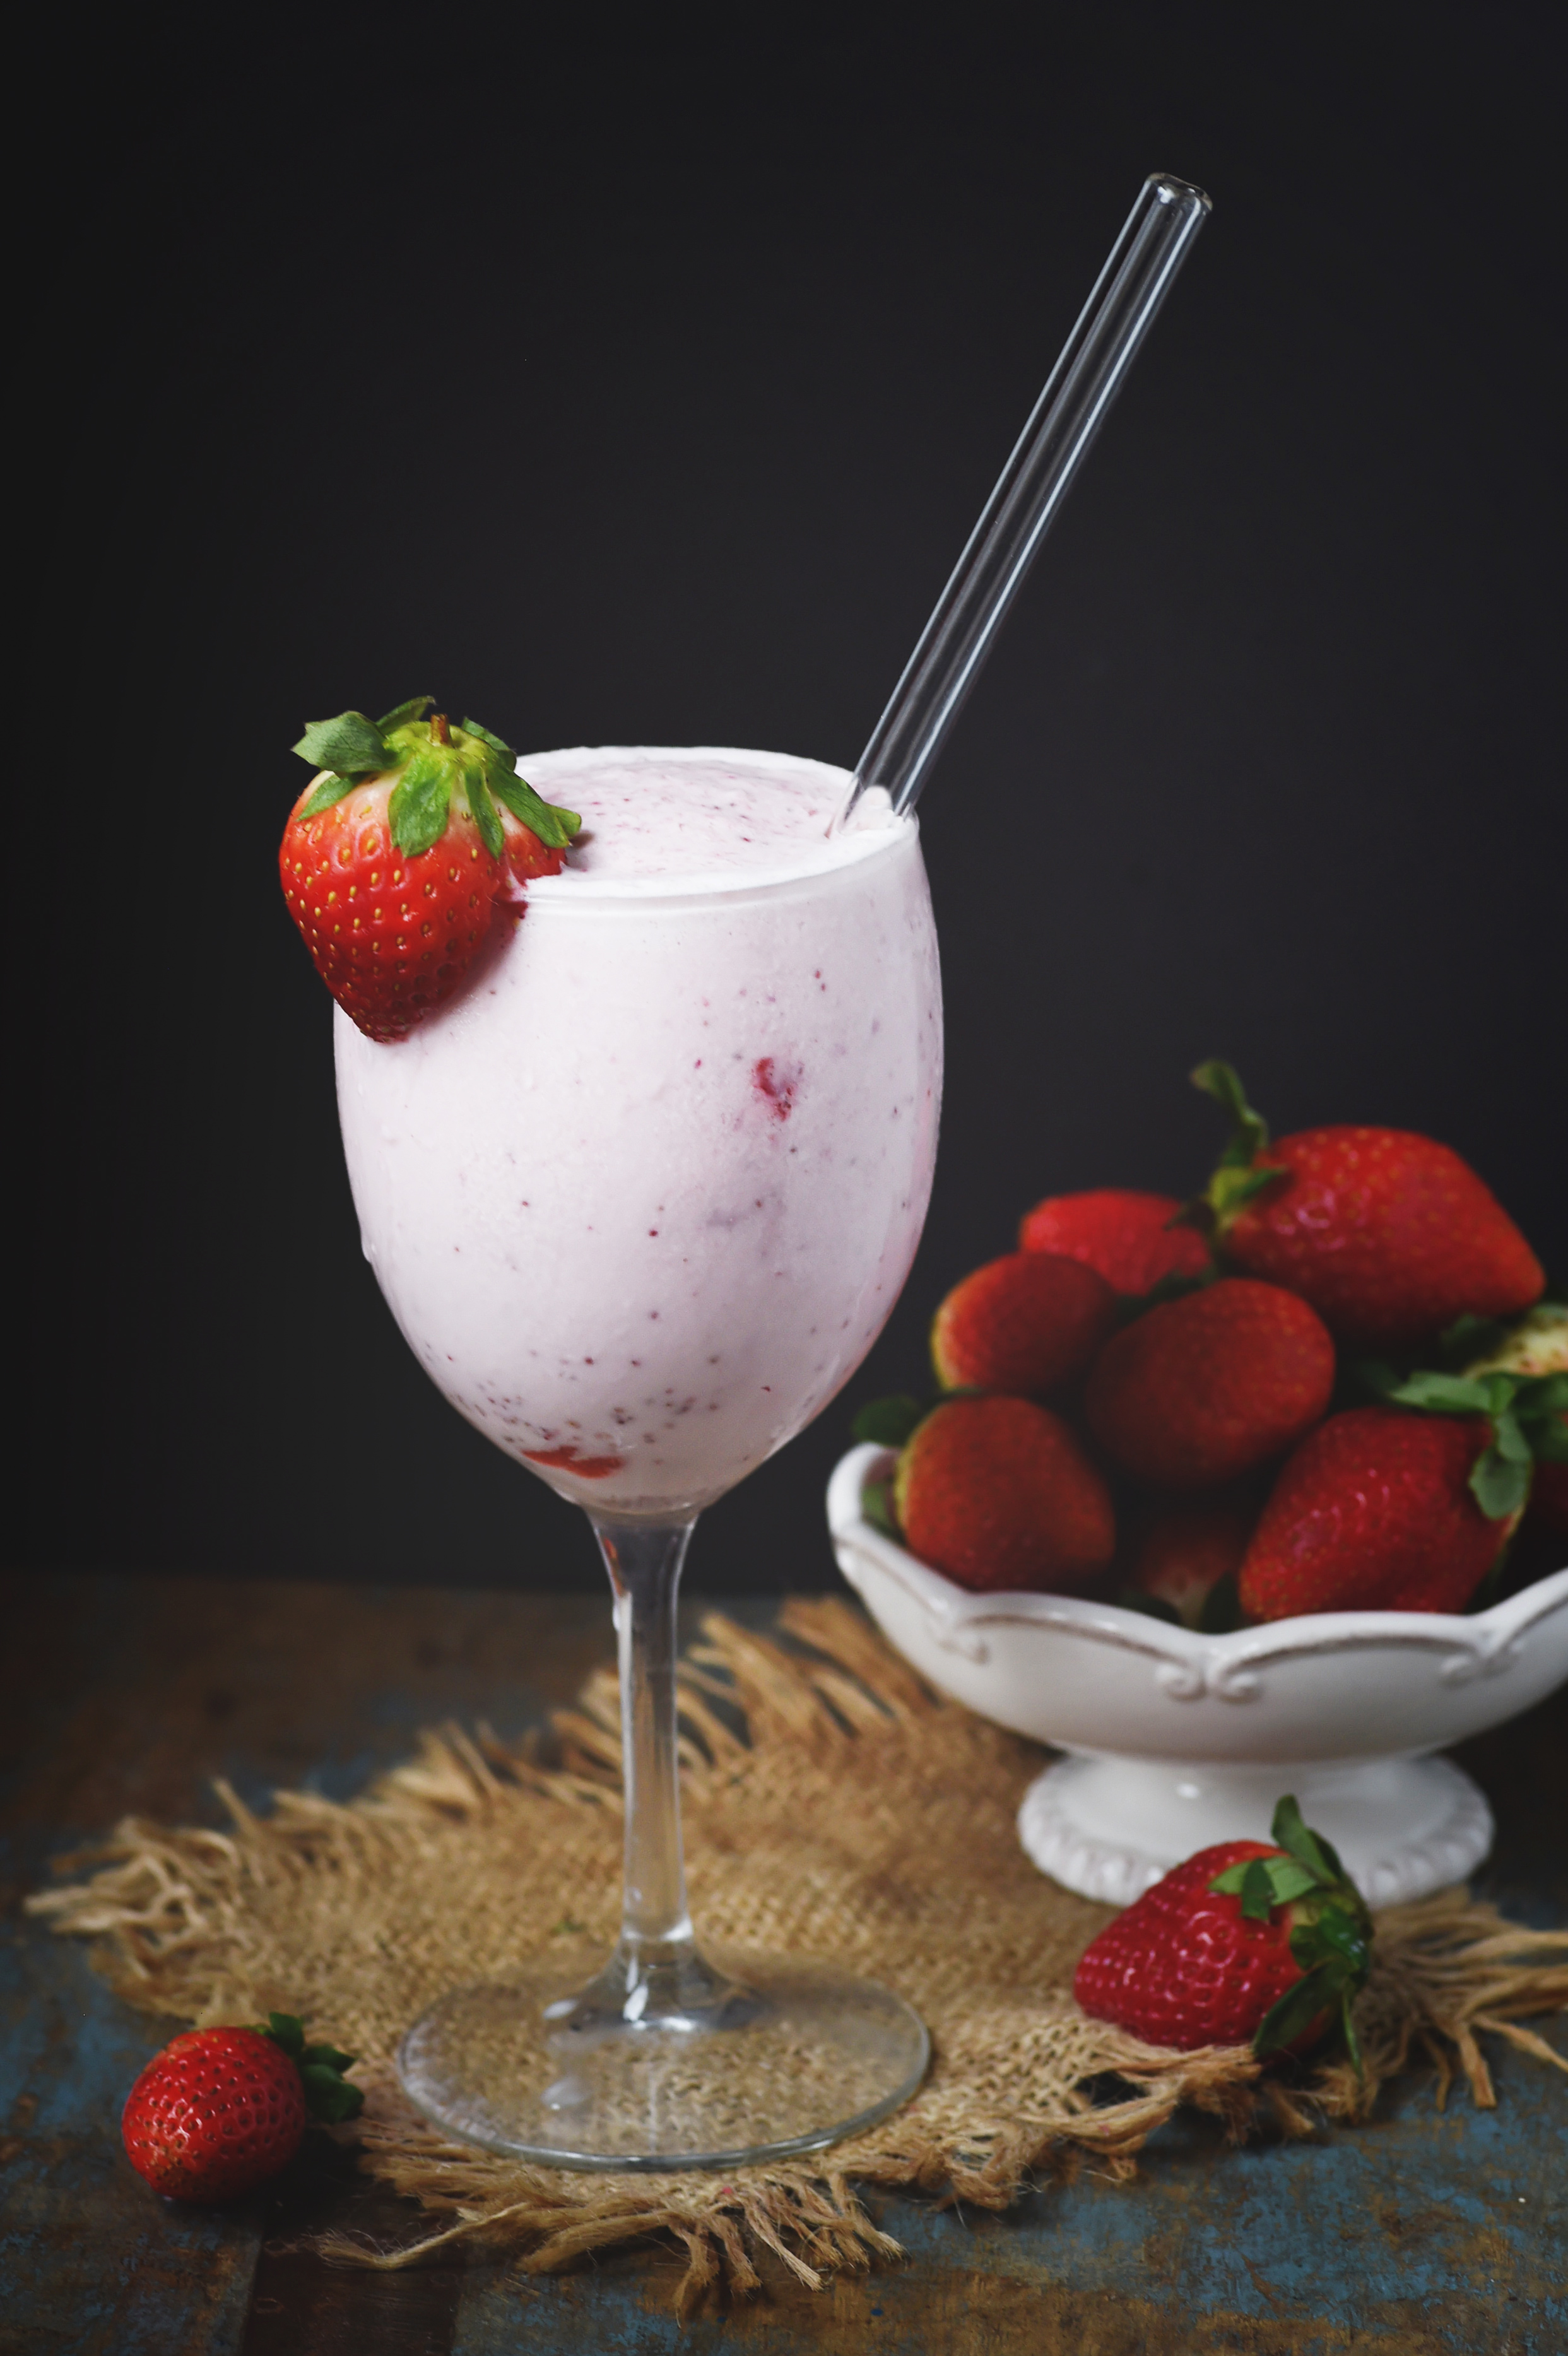 Low-Carb Strawberry Smoothie in a wine glass with a straw.